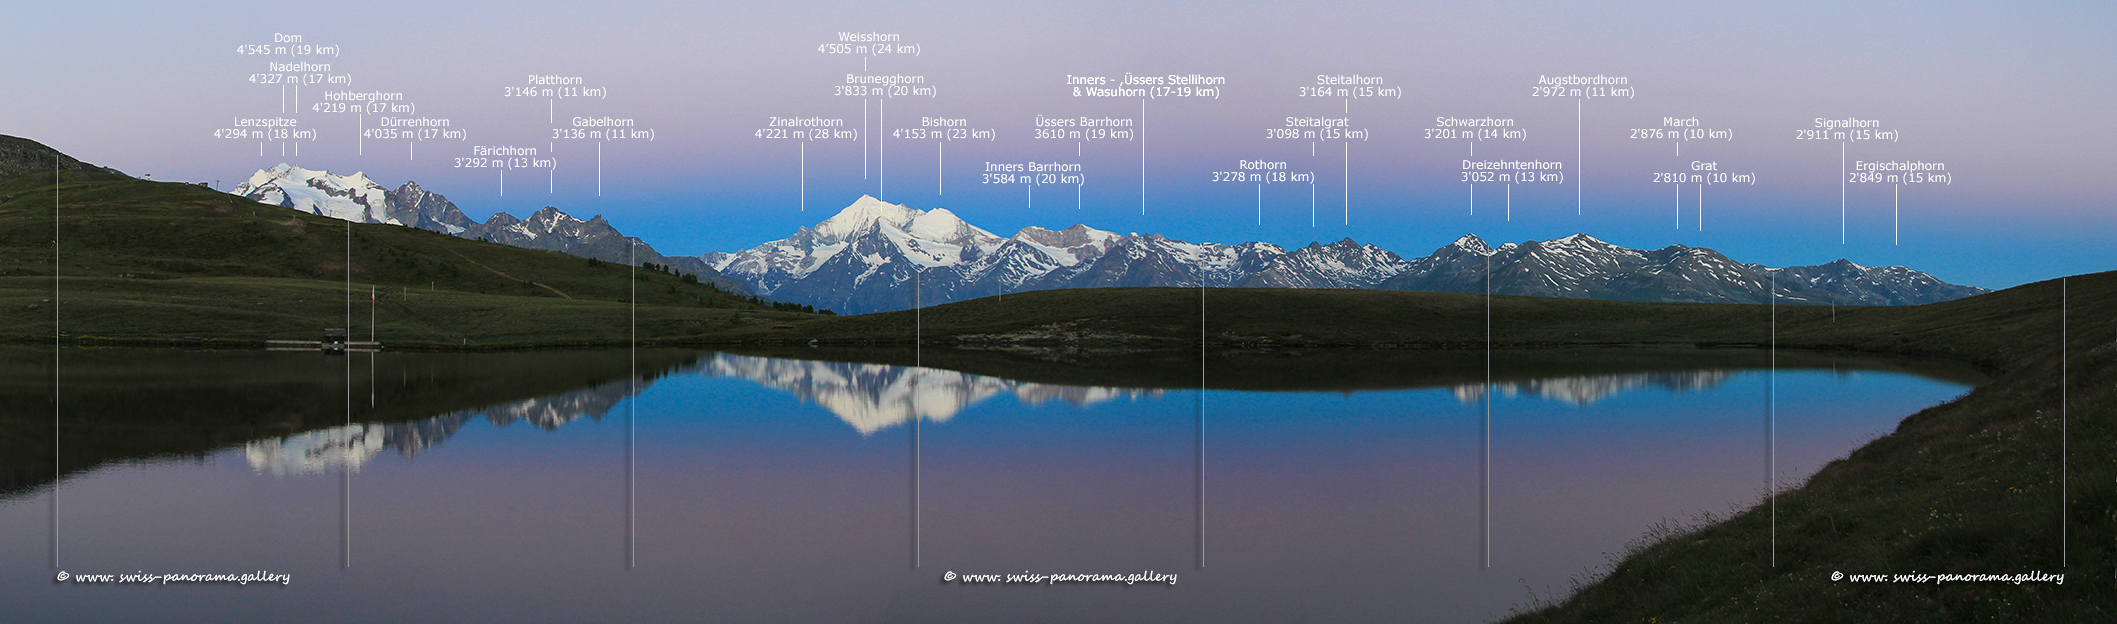 Panorama Gibidumsee,  a morning scenery before sunrise, the Mischabel Group and the Weisshorn reflecting in the lake Gibidum  at twilight.